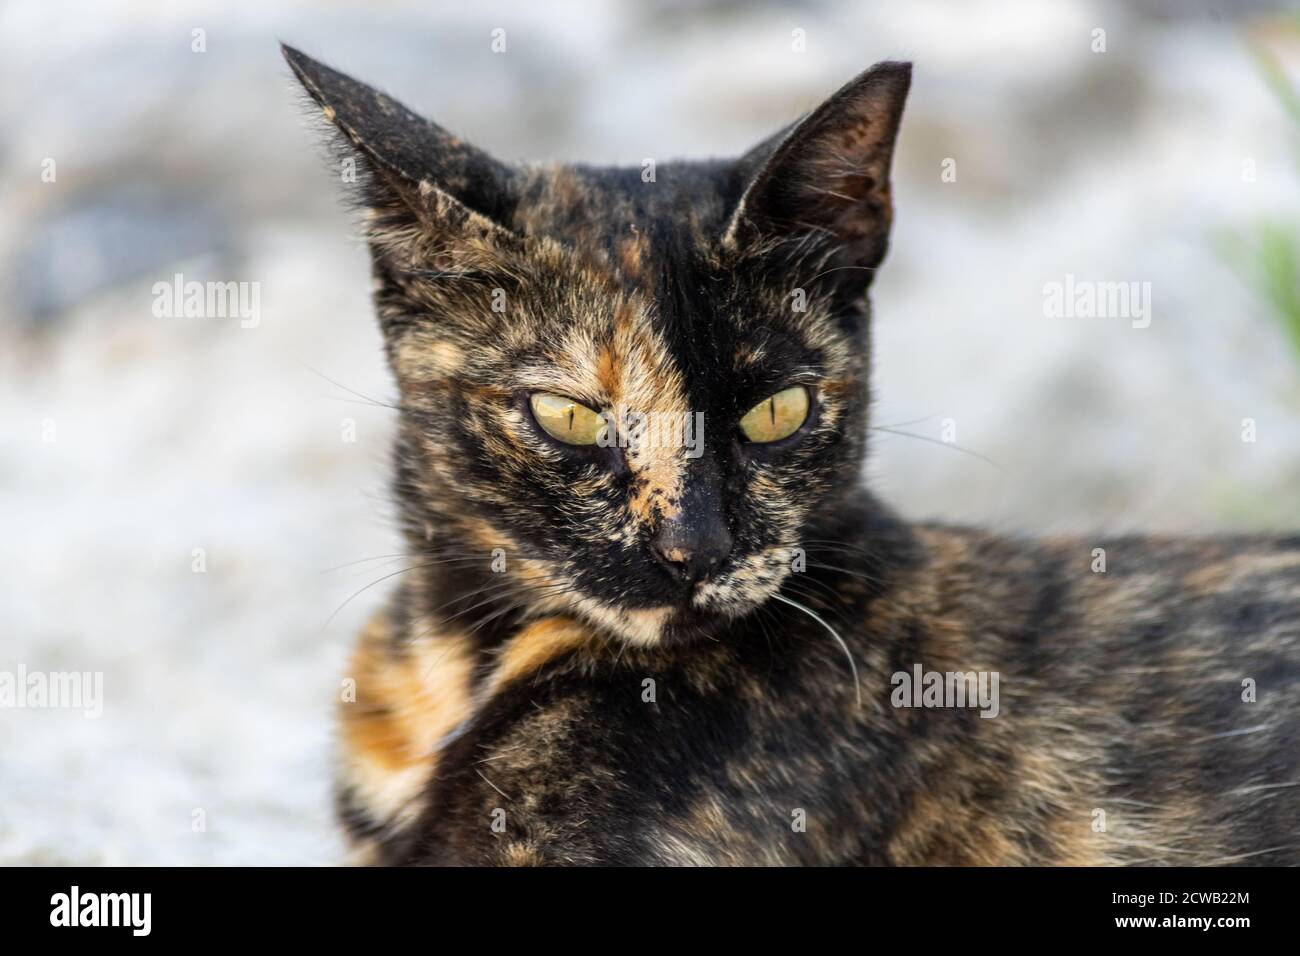 Closeup of a gold and black cat with yellow eyes lying on a stone floor Stock Photo